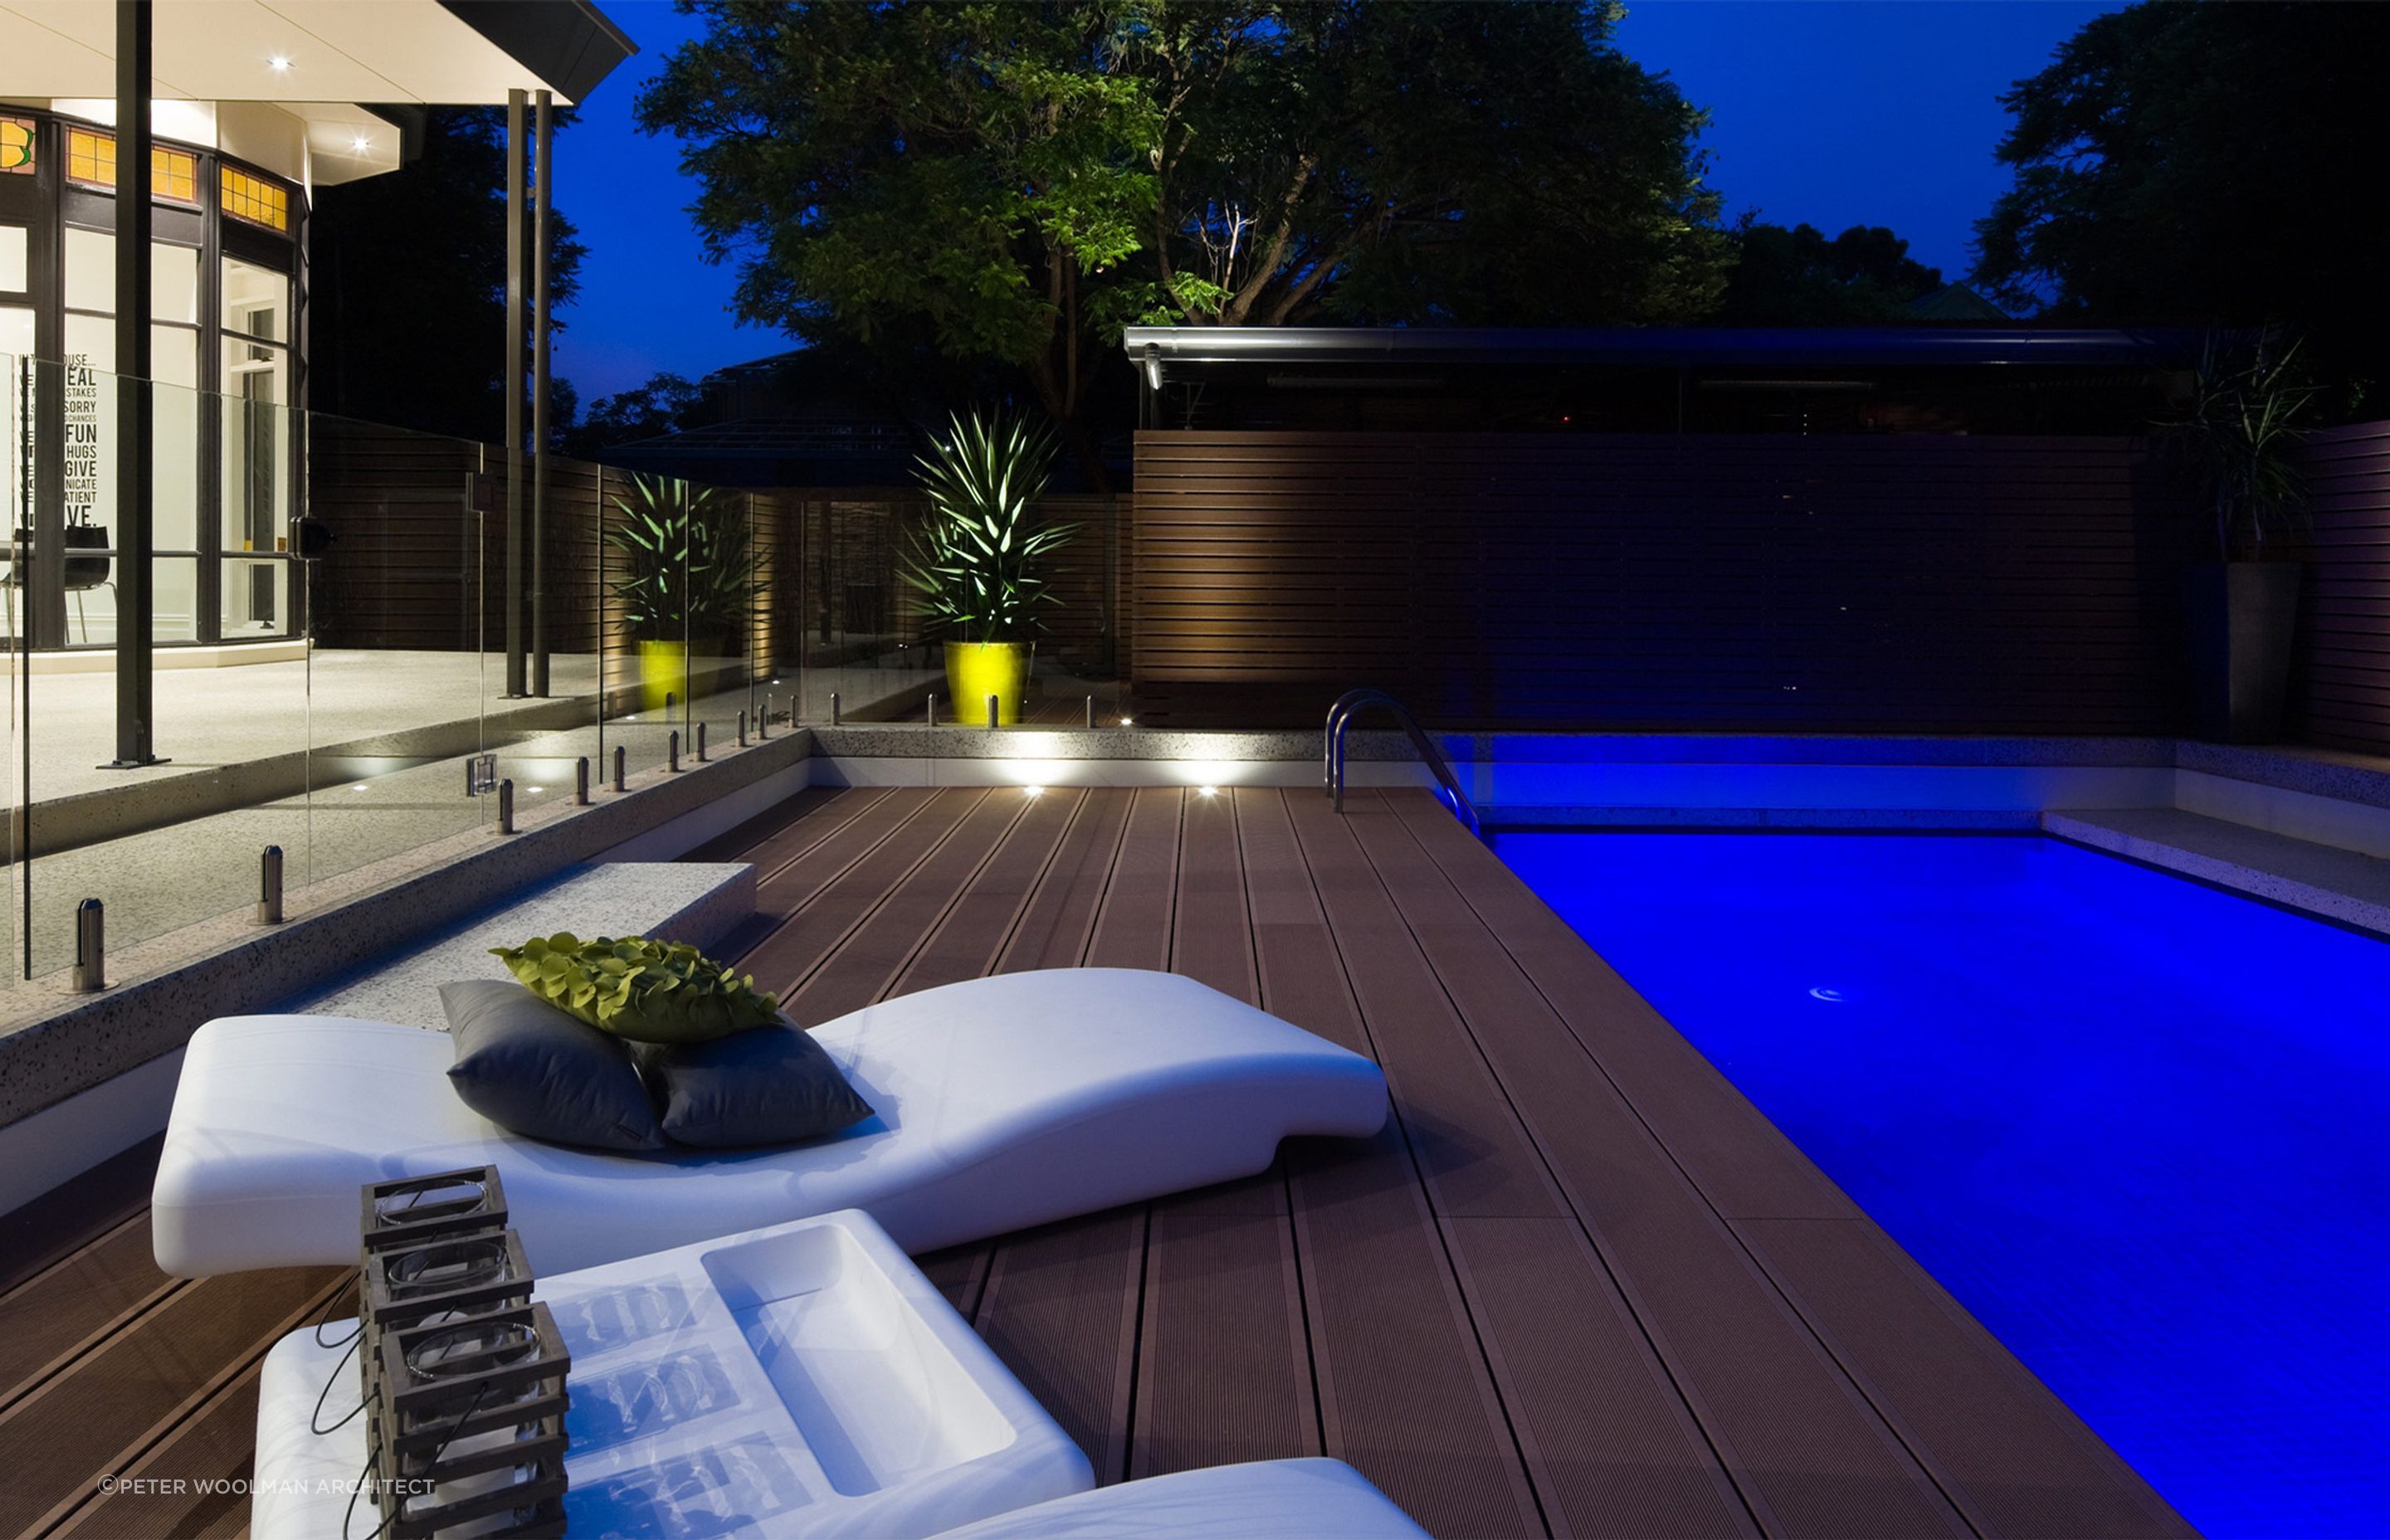 Soft outdoor loungers help create a functional outdoor space. Featured project: The Pool Deck Unley - Peter Woolman Architect